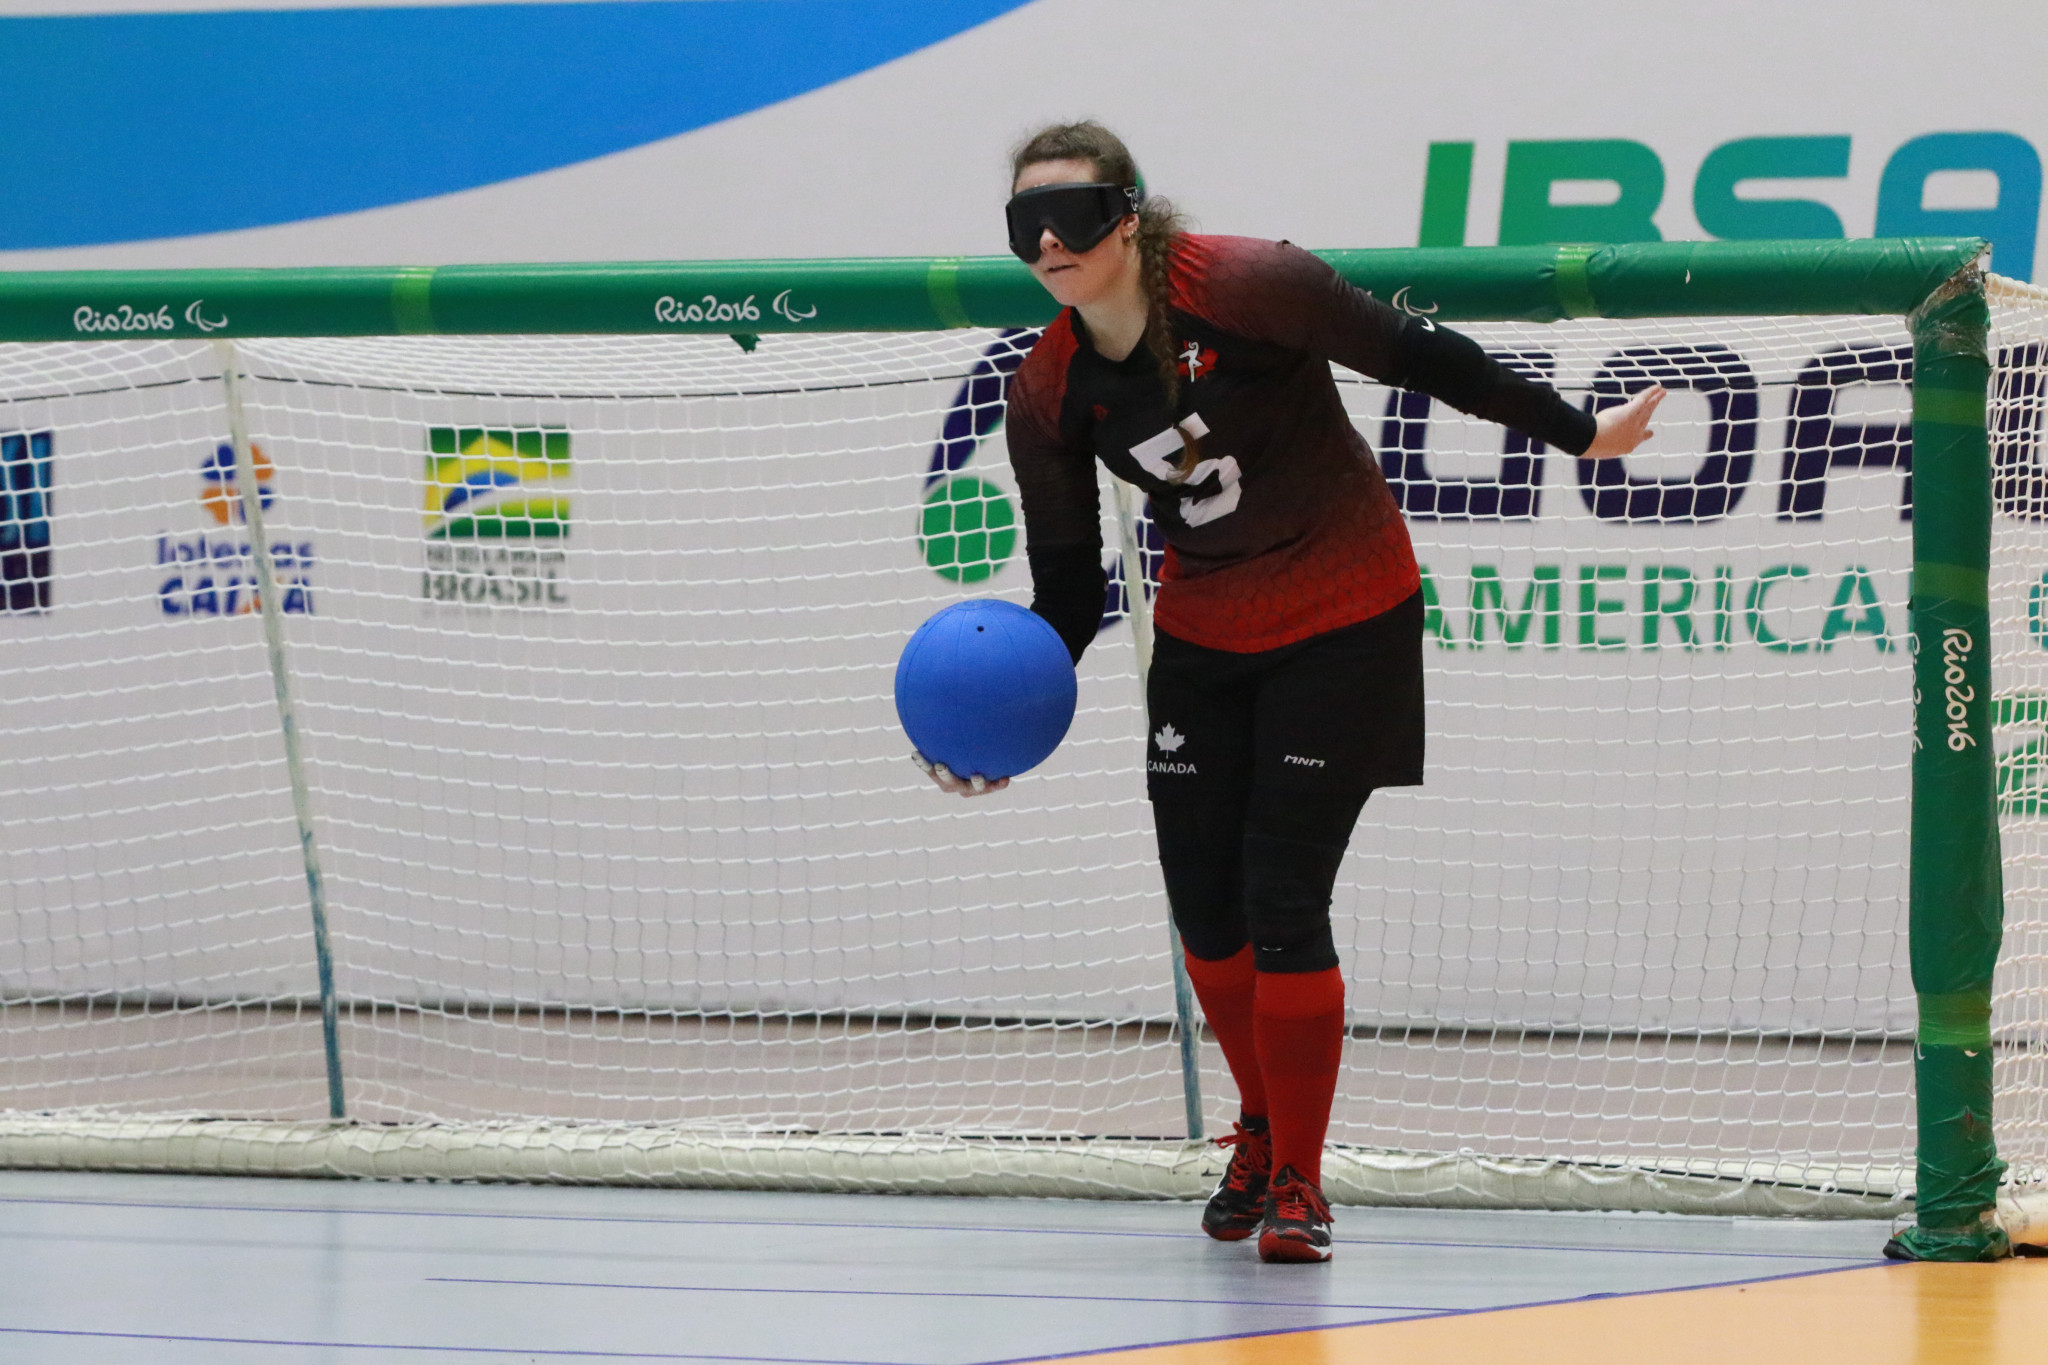 Canada topped Pool D after an impressive 6-3 and 10-1 wins over the United States and Argentina respectively on the final day of the first phase of the women's competition ©Renan Cacioli/CBDV